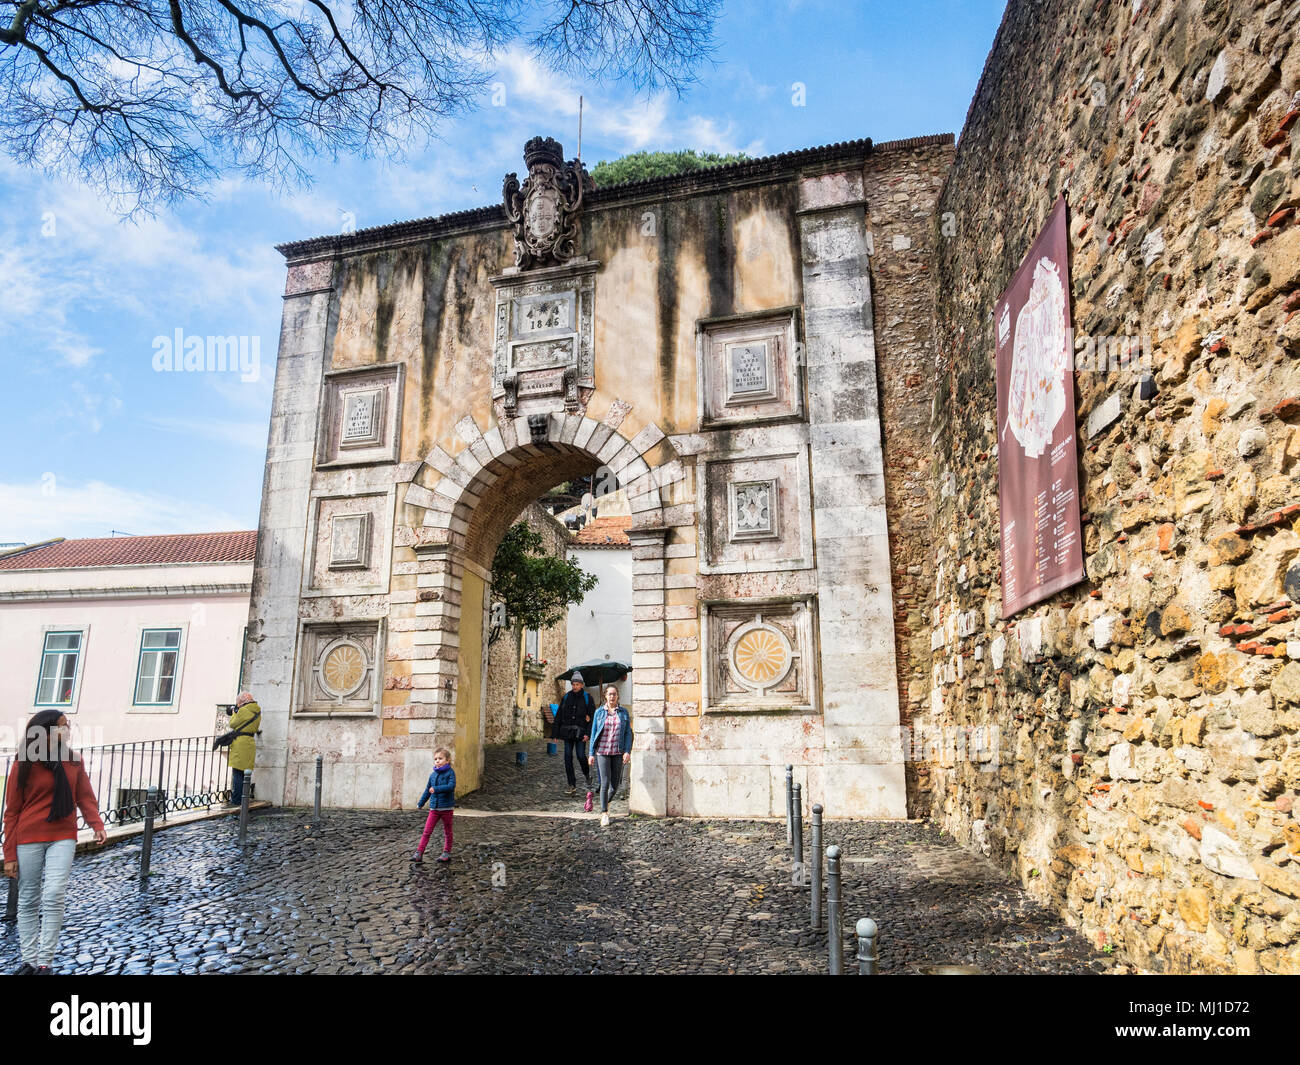 1 March 2018: Lisbon, Portugal - The entrance to the Castle of St George, dated 1846, on the first day of spring. Stock Photo